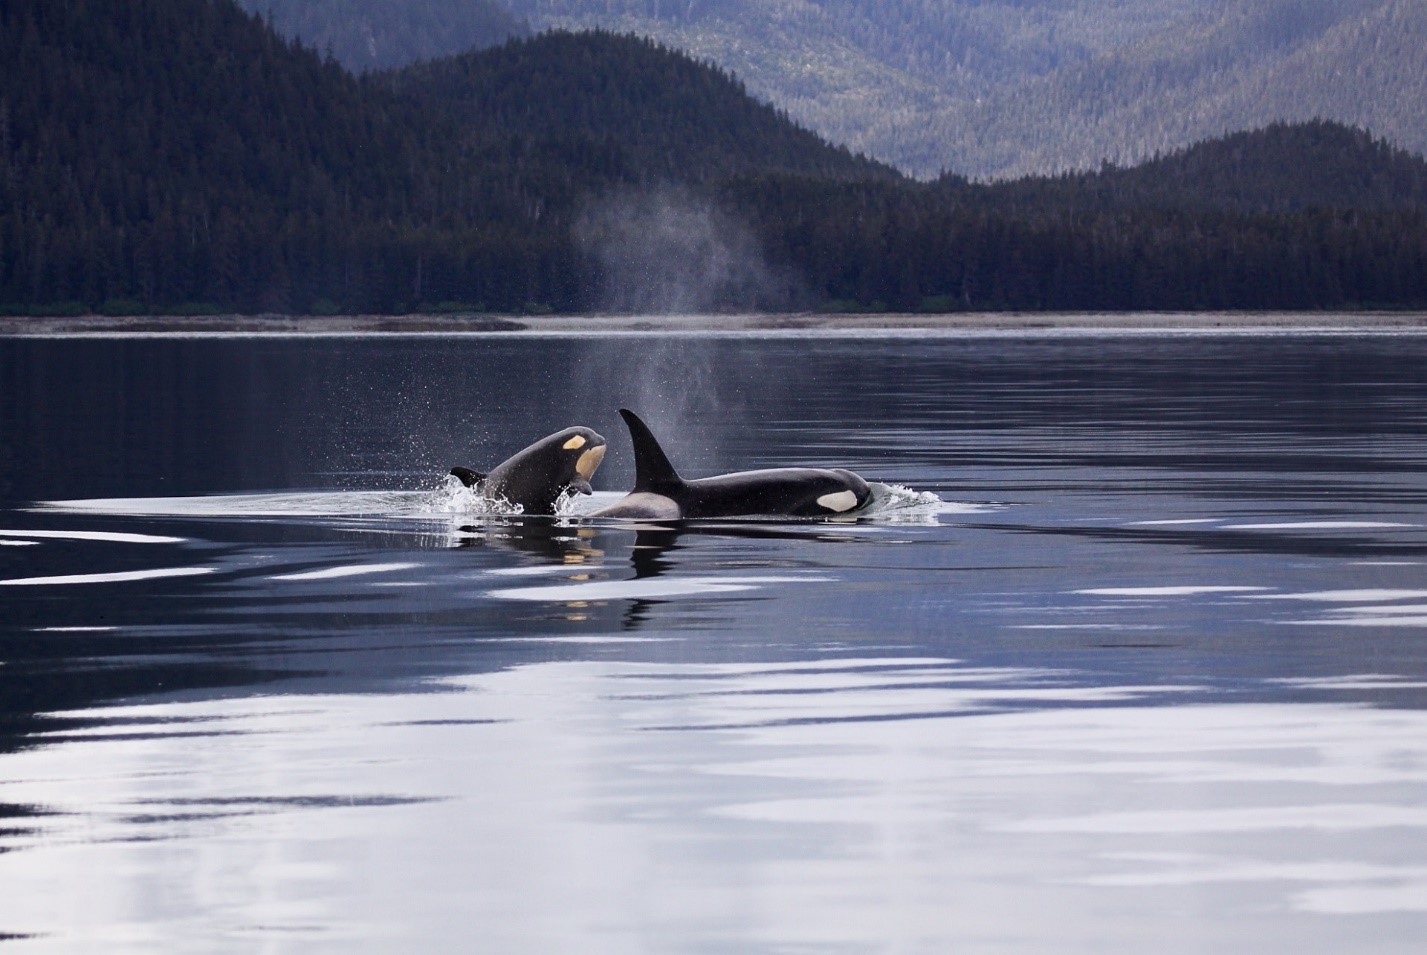 Two orcas are breaching calm waters.